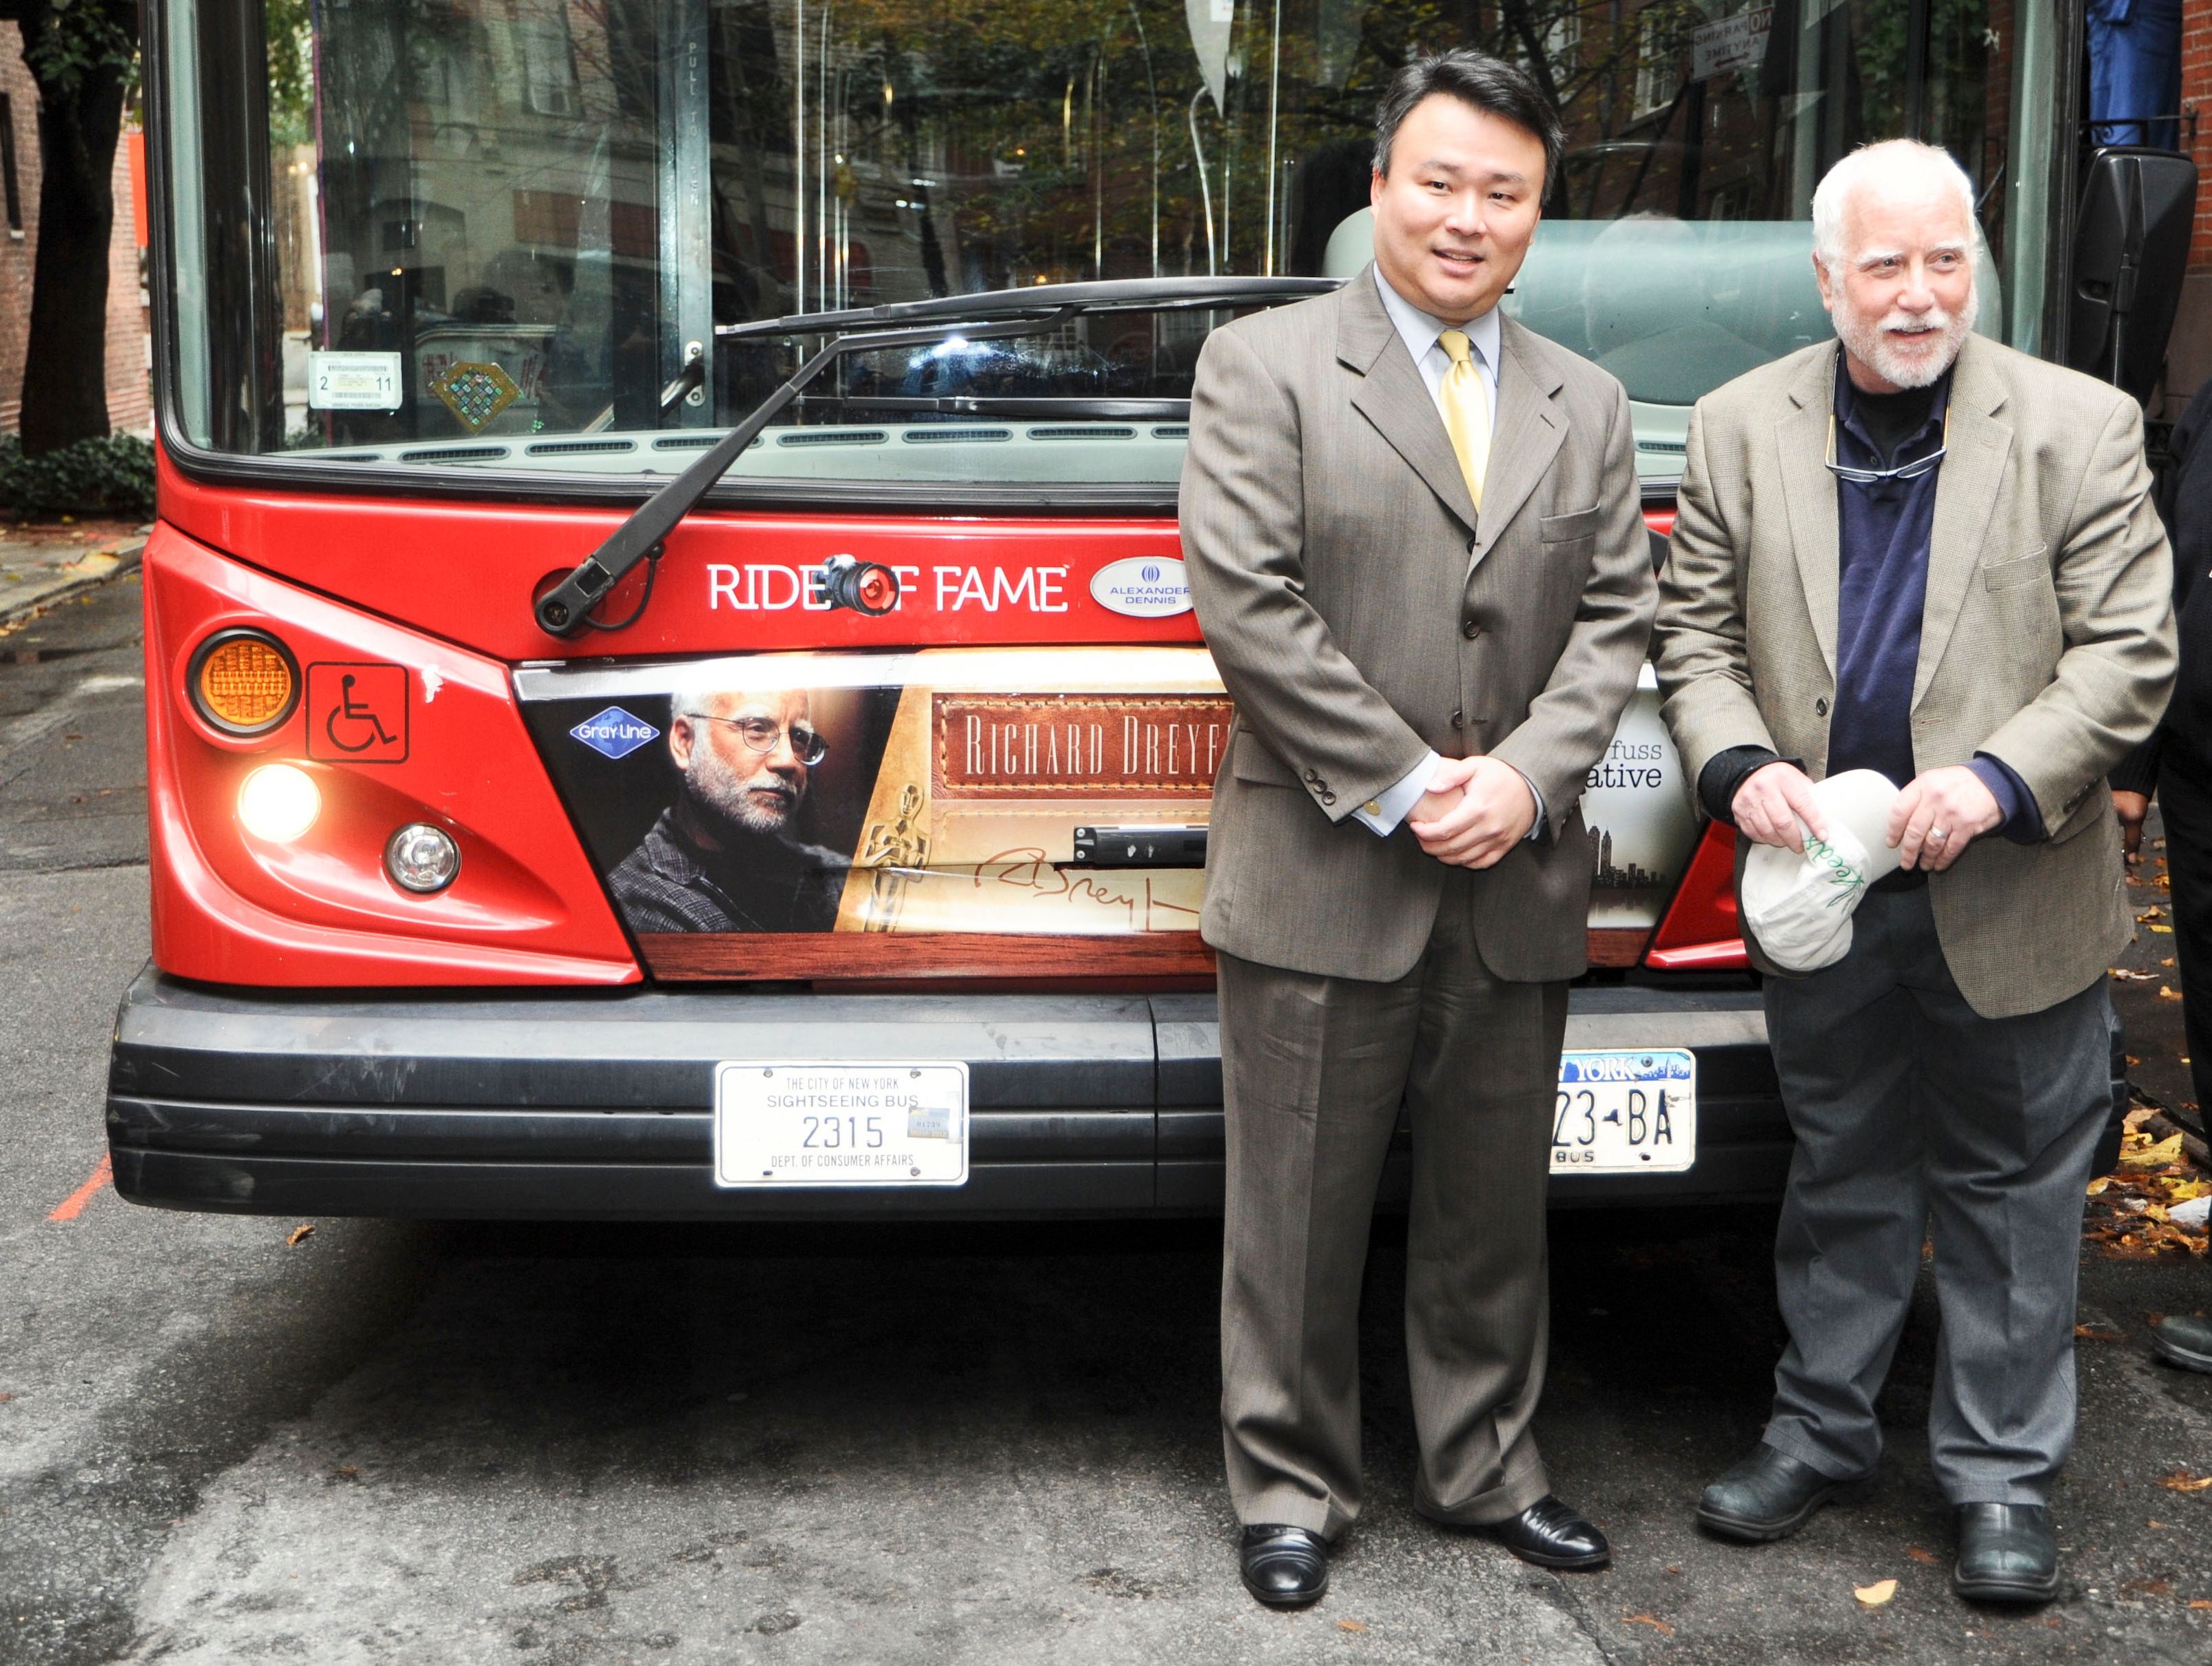 David W. Chien poses with Ride of Fame Honoree Richard Dreyfuss (November 5th, 2010).